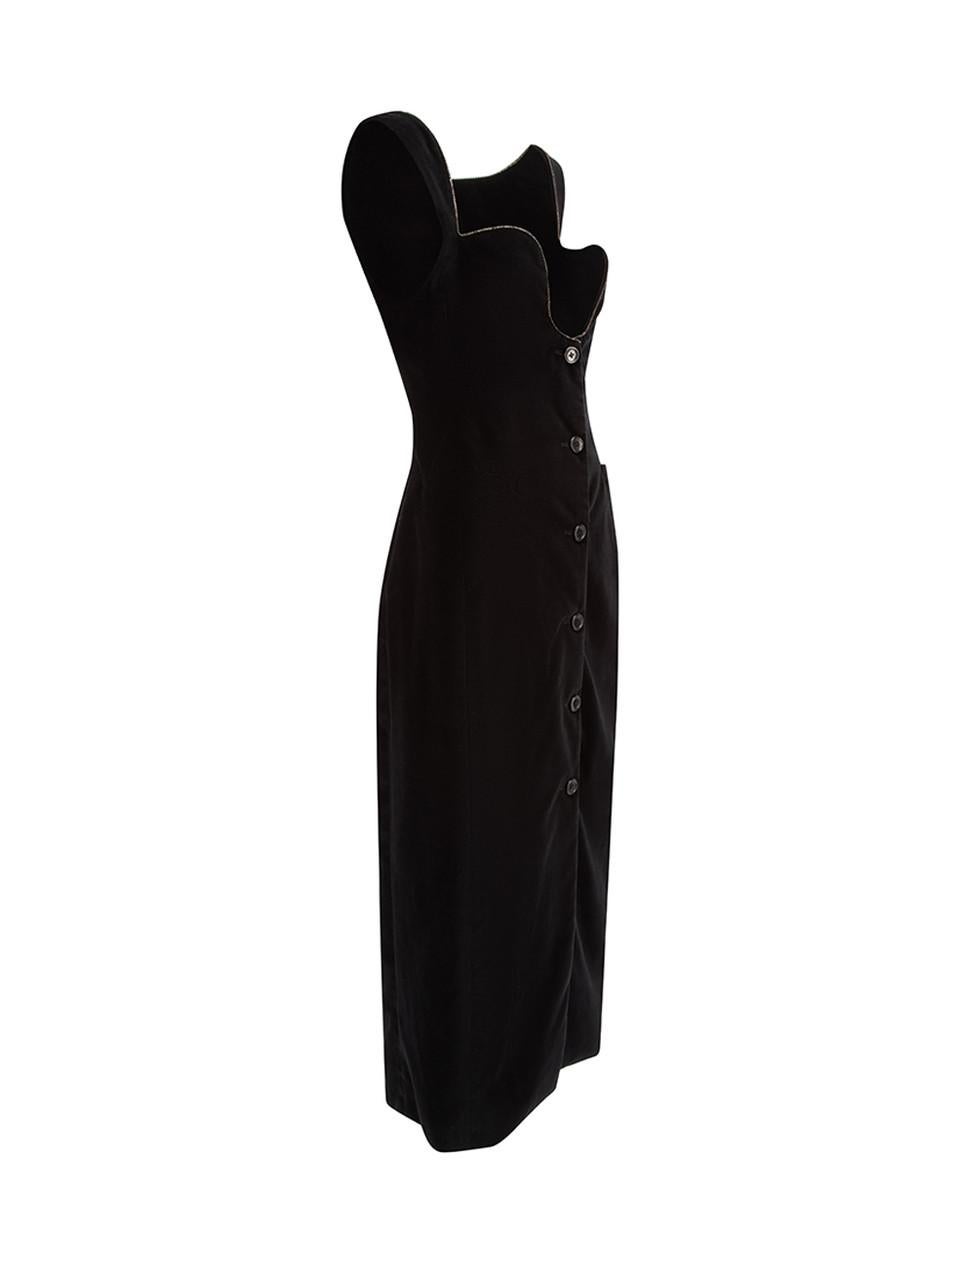 CONDITION is Very good. Hardly any visible wear to dress is evident on this used Sanne designer sample item. 
 
 
 
 Details
 
 
 Designer sample item
 
 Black
 
 Velvet
 
 Midi dress
 
 Sweetheart neckline
 
 Front button up closure
 
 Front side